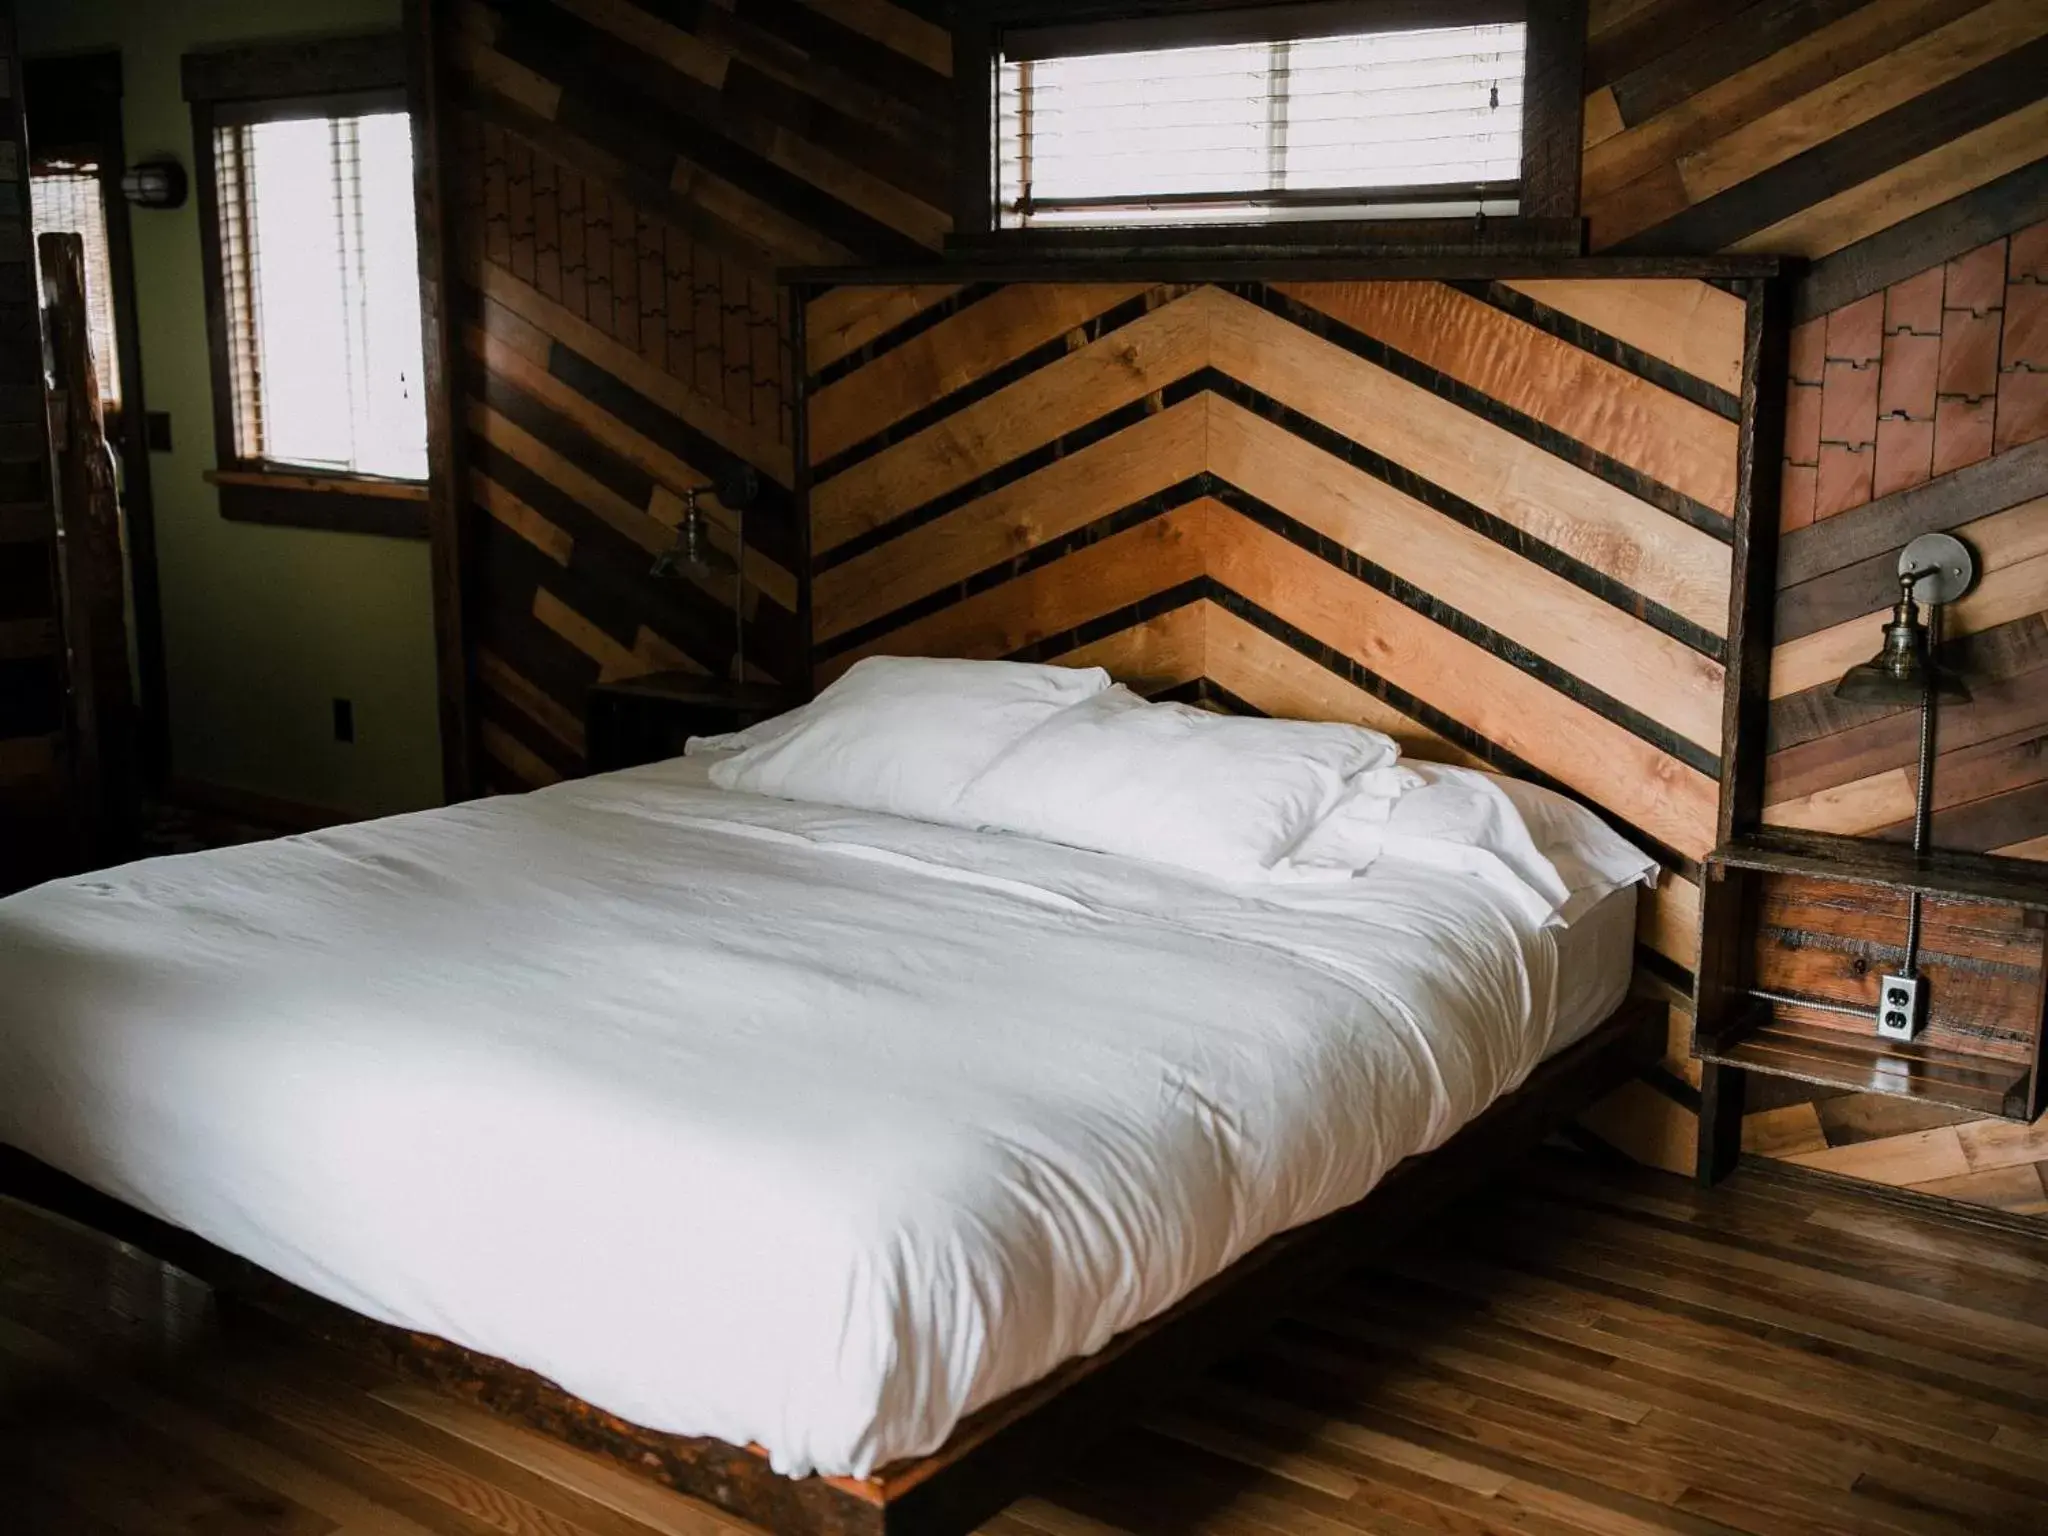 Bed in Pitchwood Inn